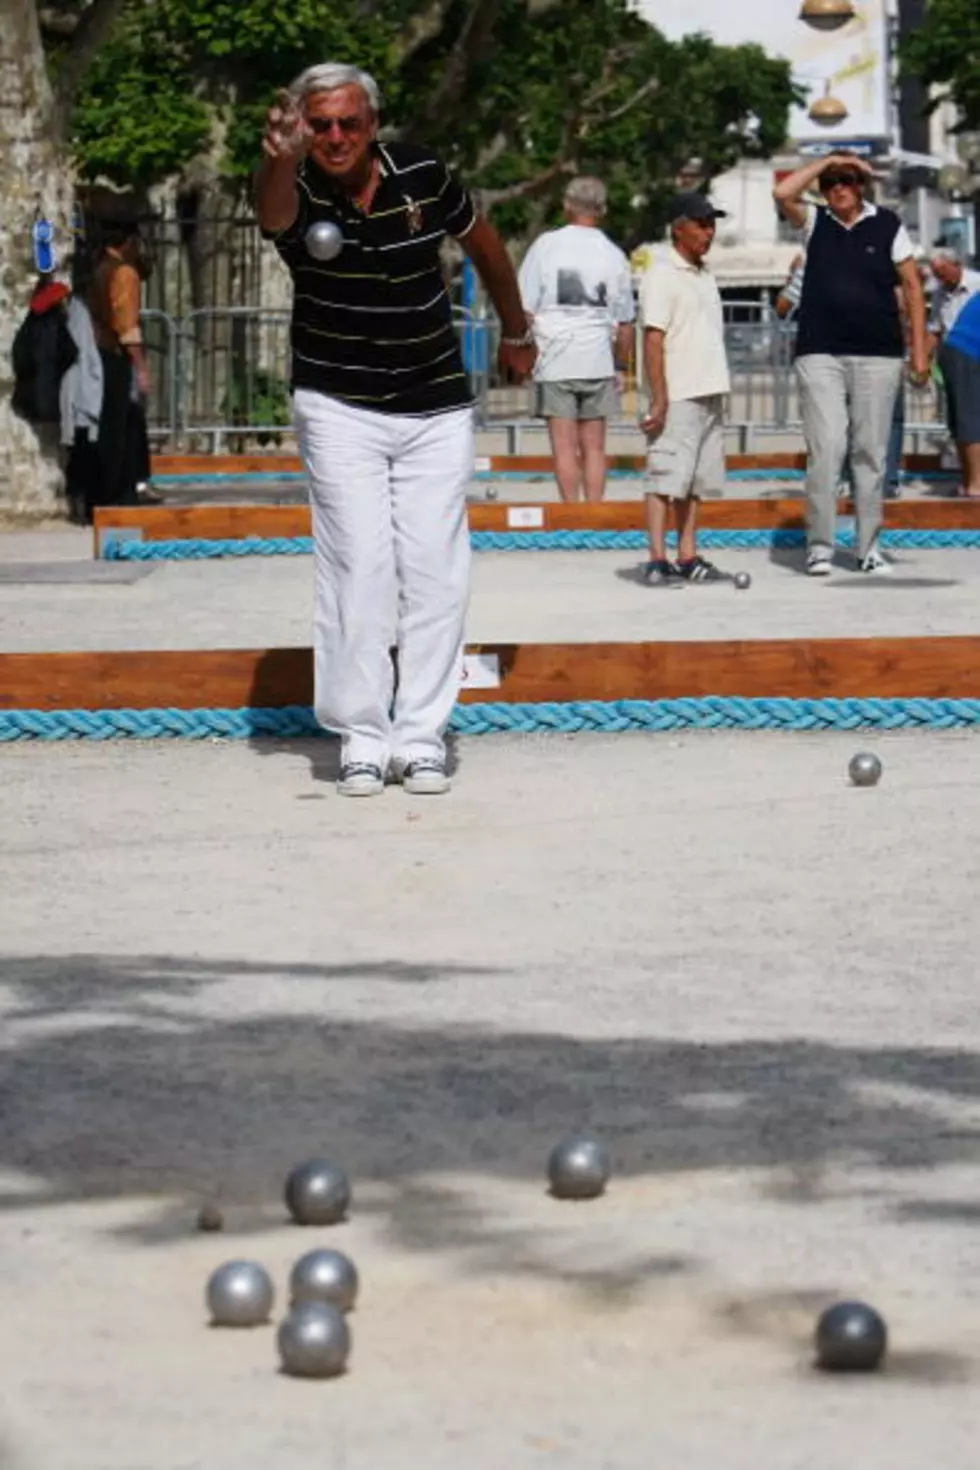 7th Annual International Petanque Tournament To Be Held In Lafayette